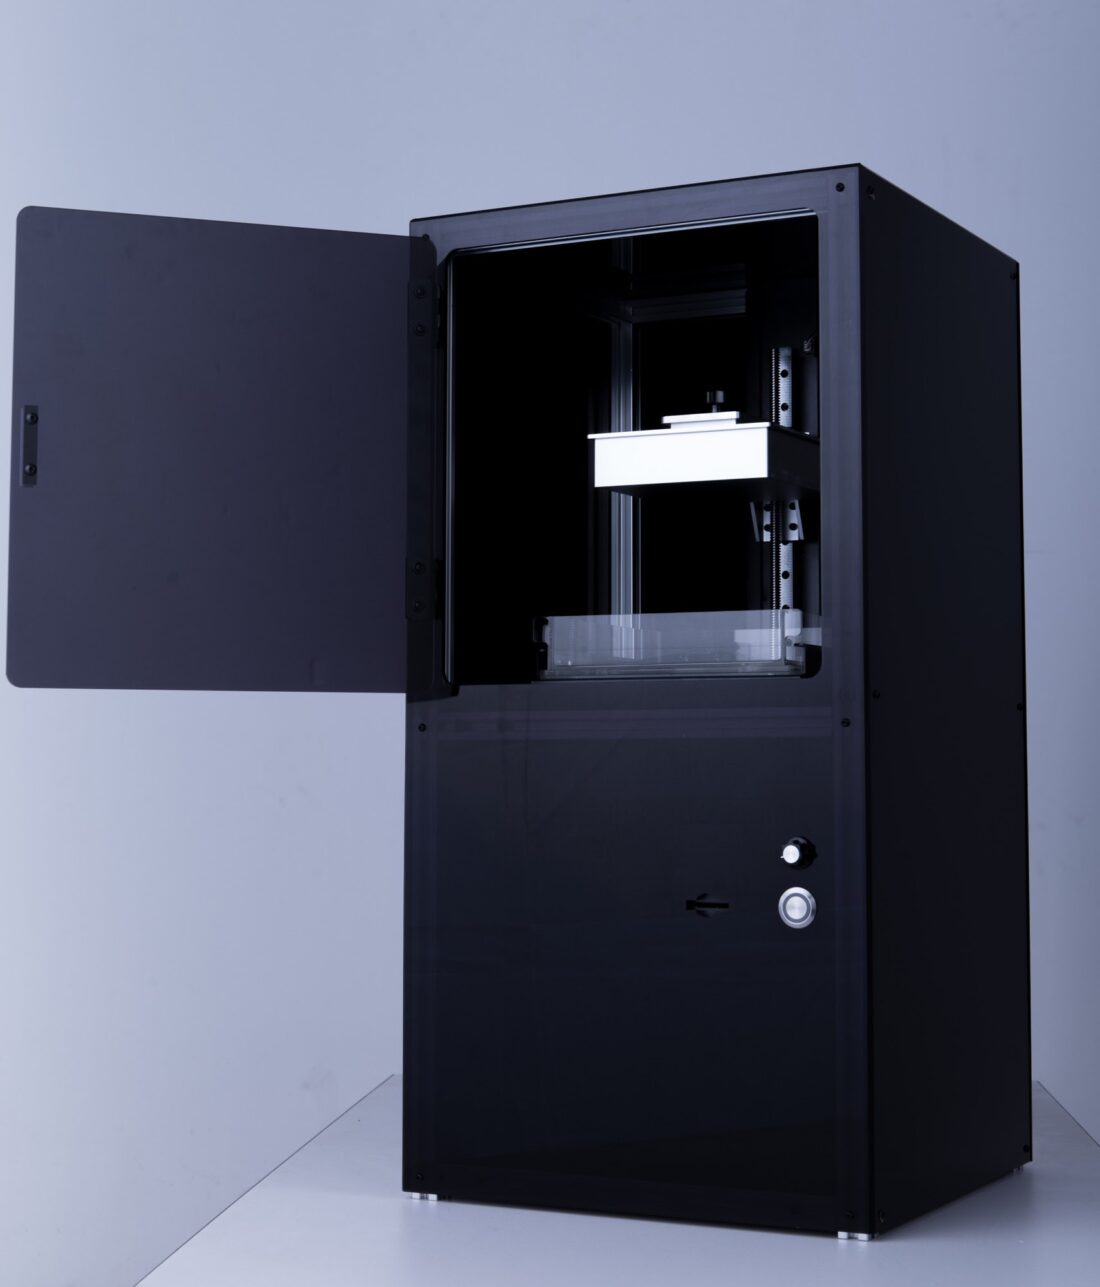 Peopoly’s Moai is outfitted with a fully adjustable 150mW laser with a 70-micron spot size. (Image credit Peopoly)